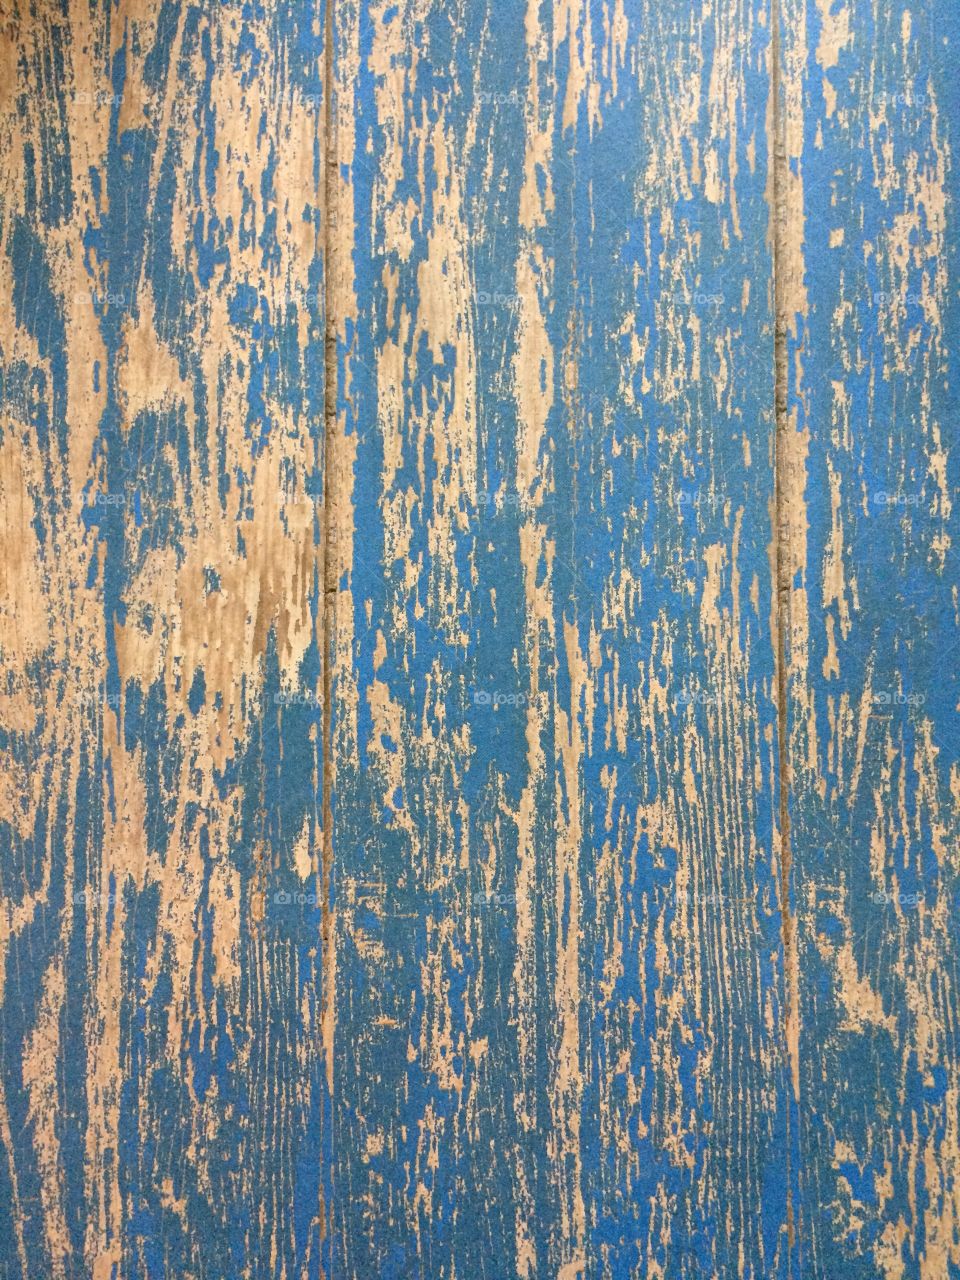 Distressed Blue Wood Table